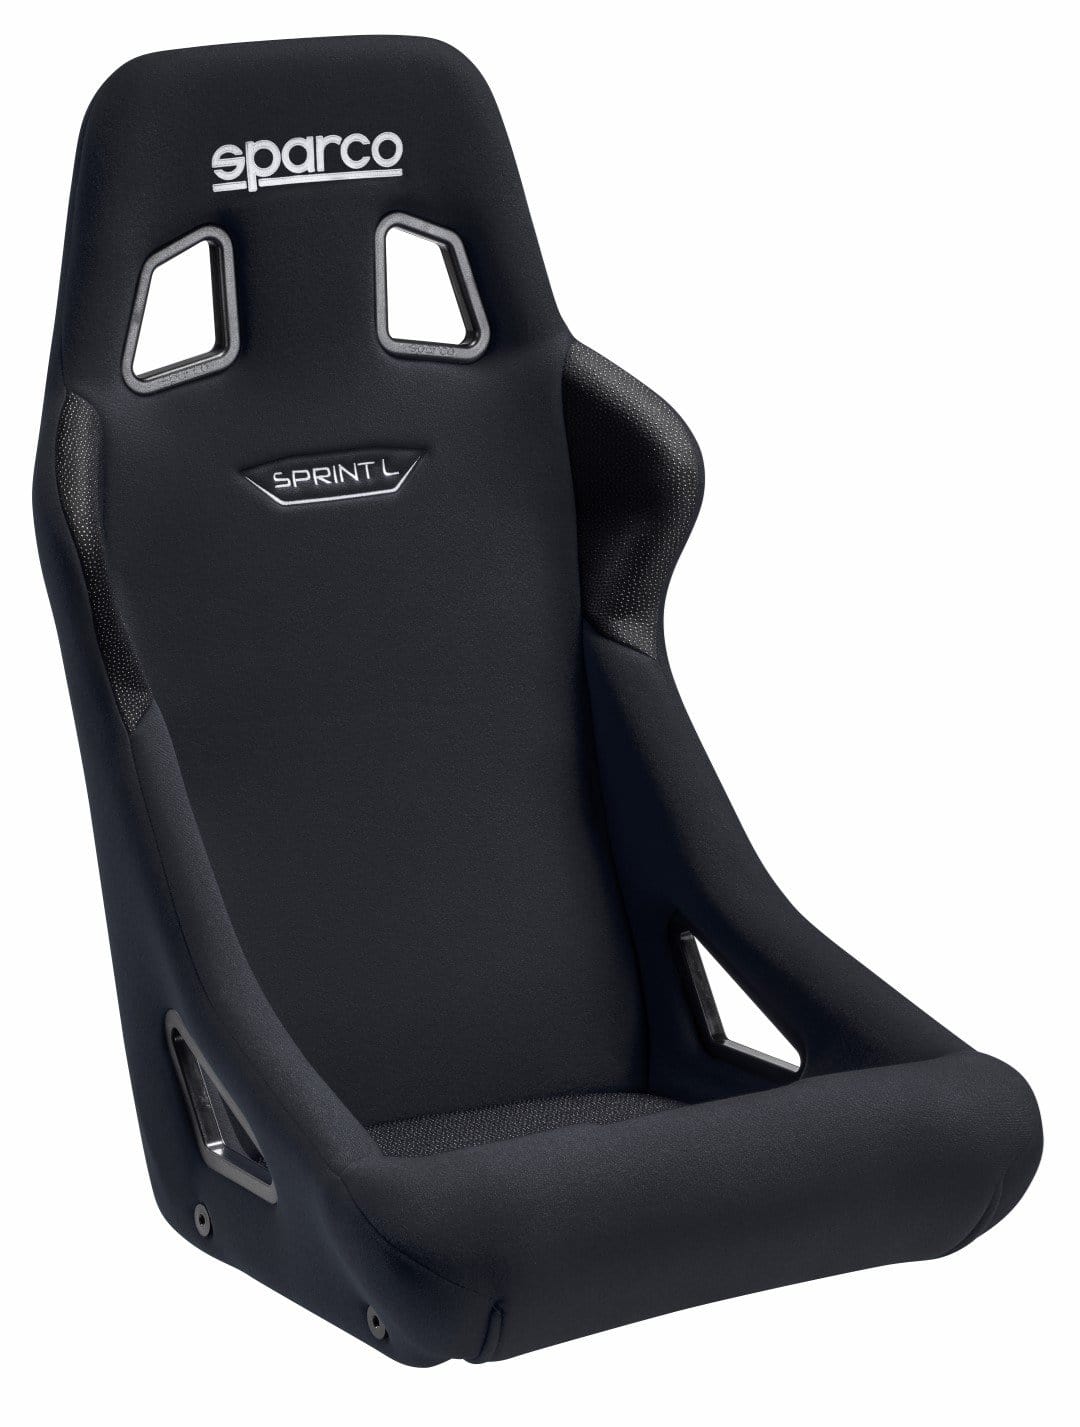 Sparco Sprint Seat (Large) Black - Universal - Dirty Racing Products